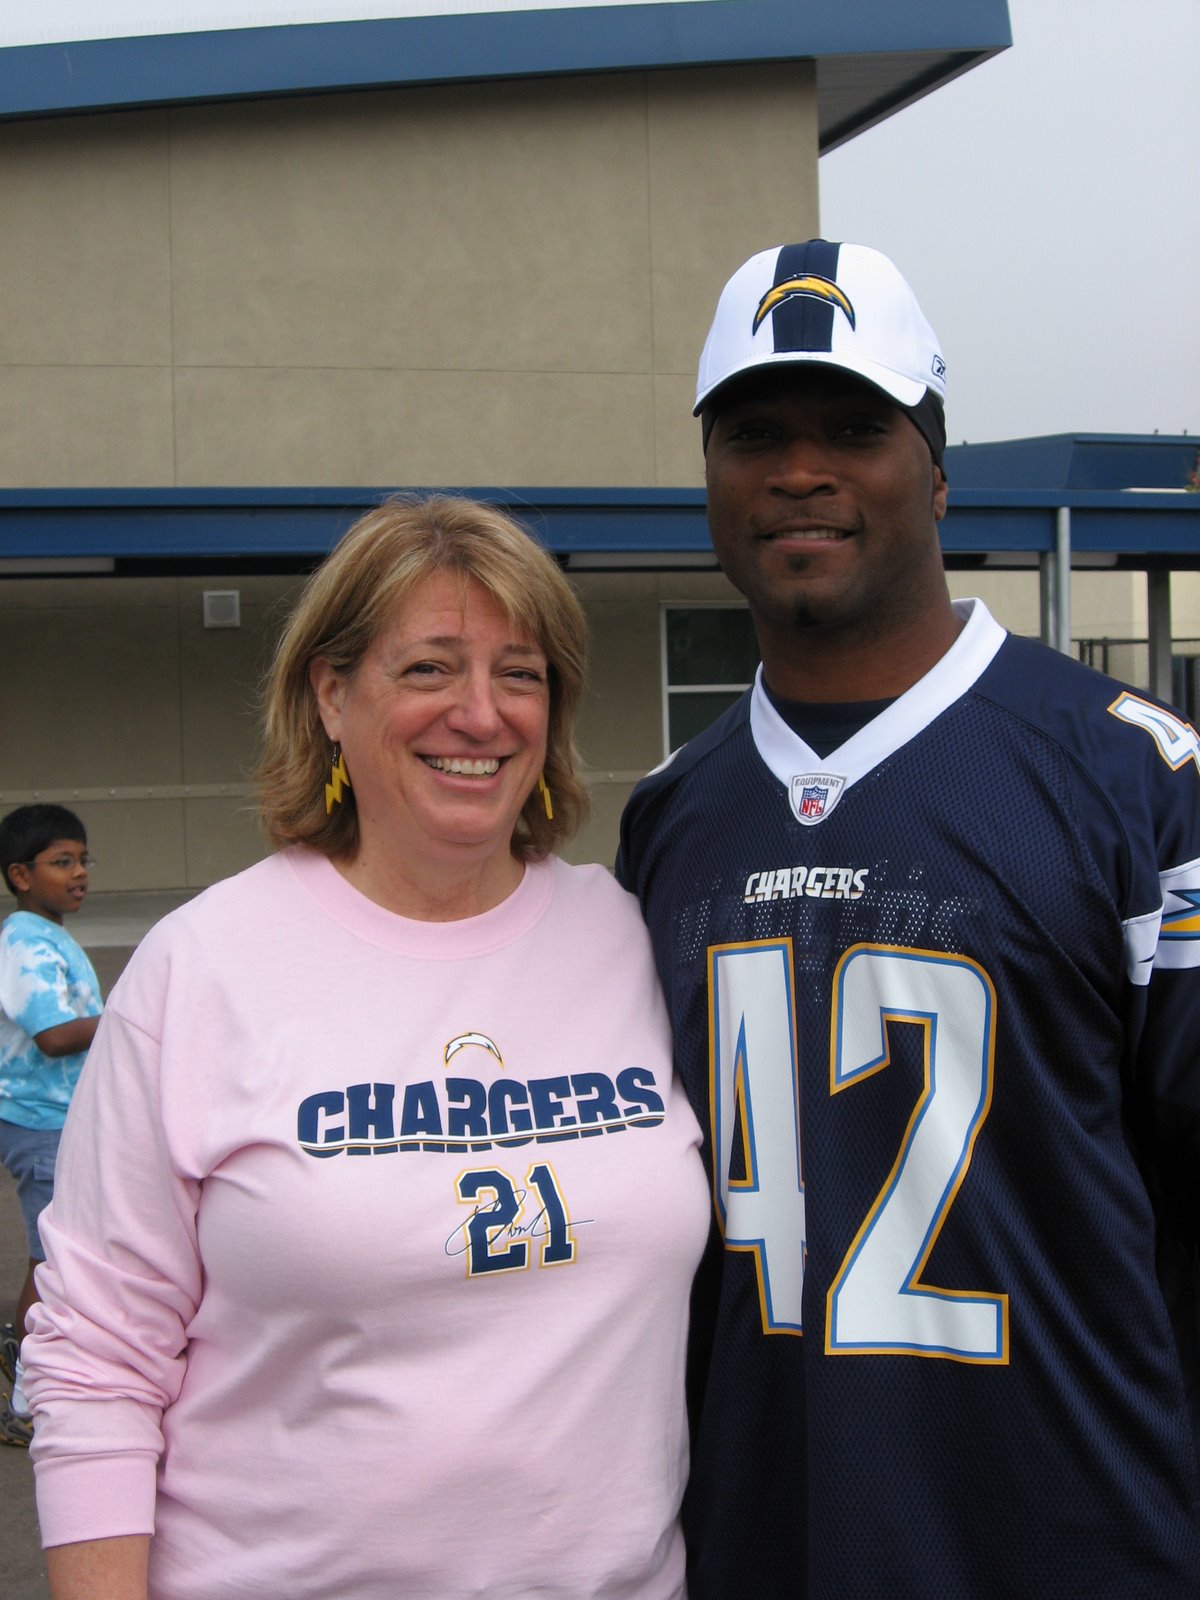 [Chargers+at+Westwood+081.jpg]